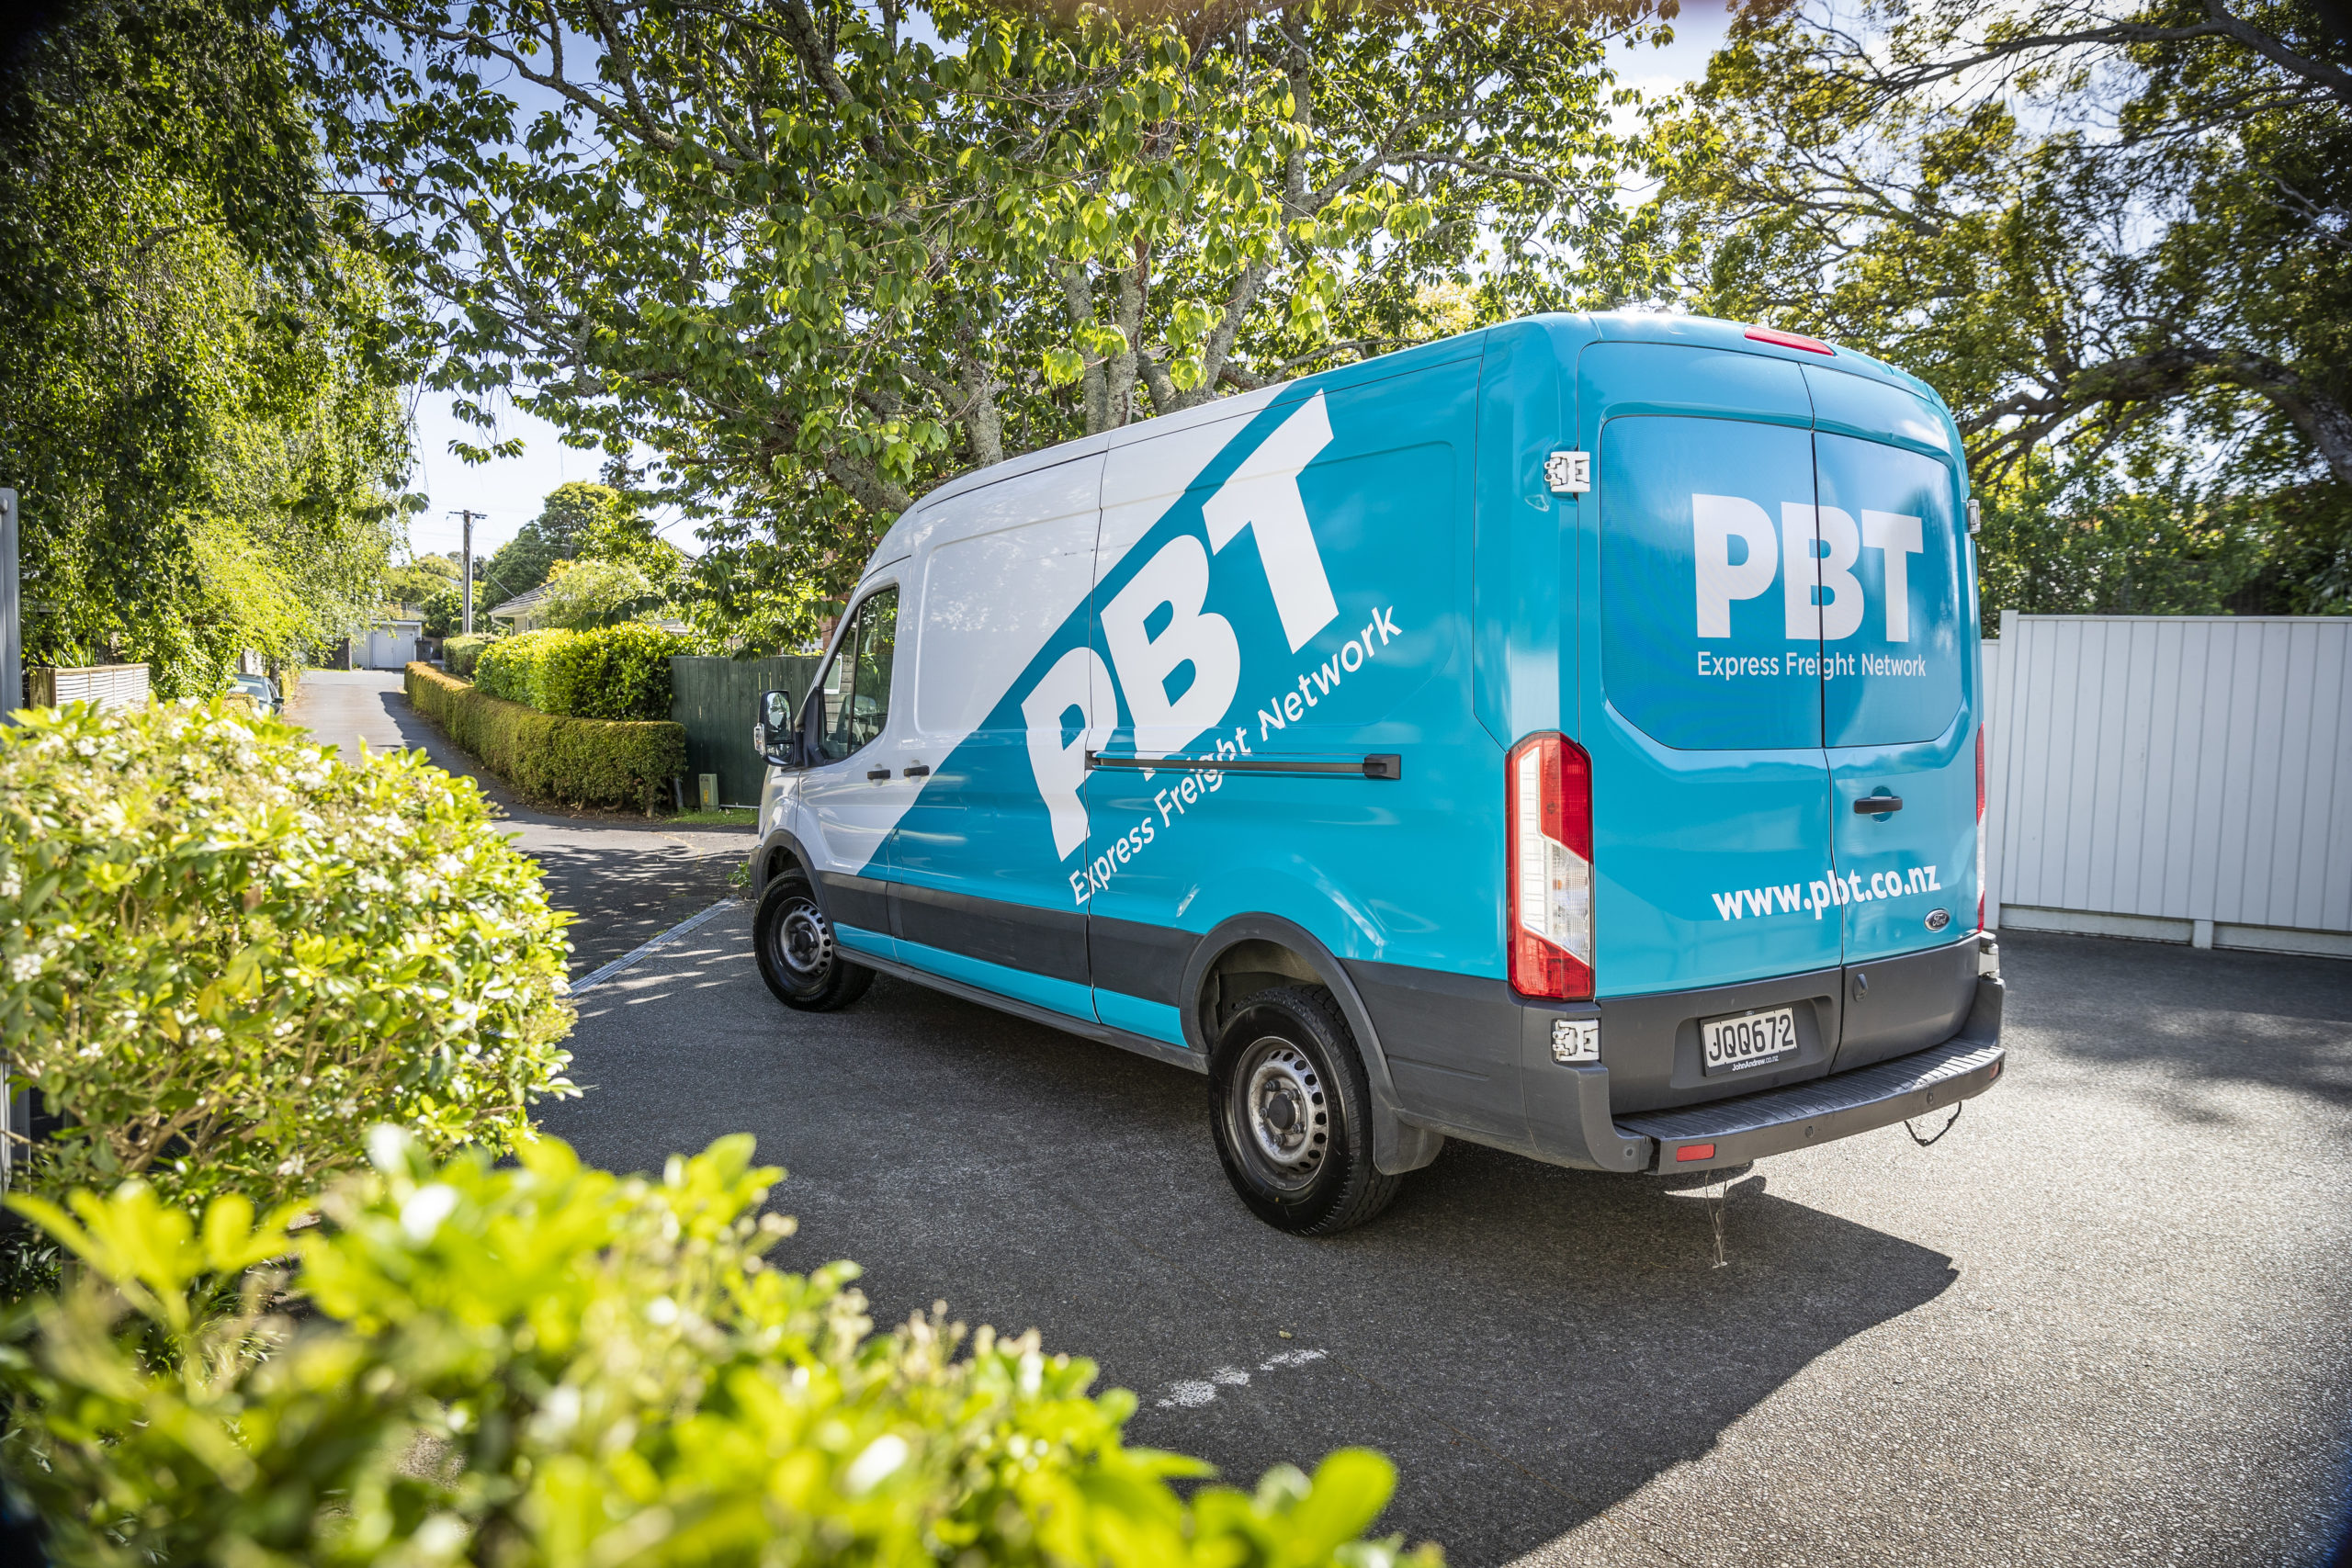 Sale of PBT Courier Business to NZ Post